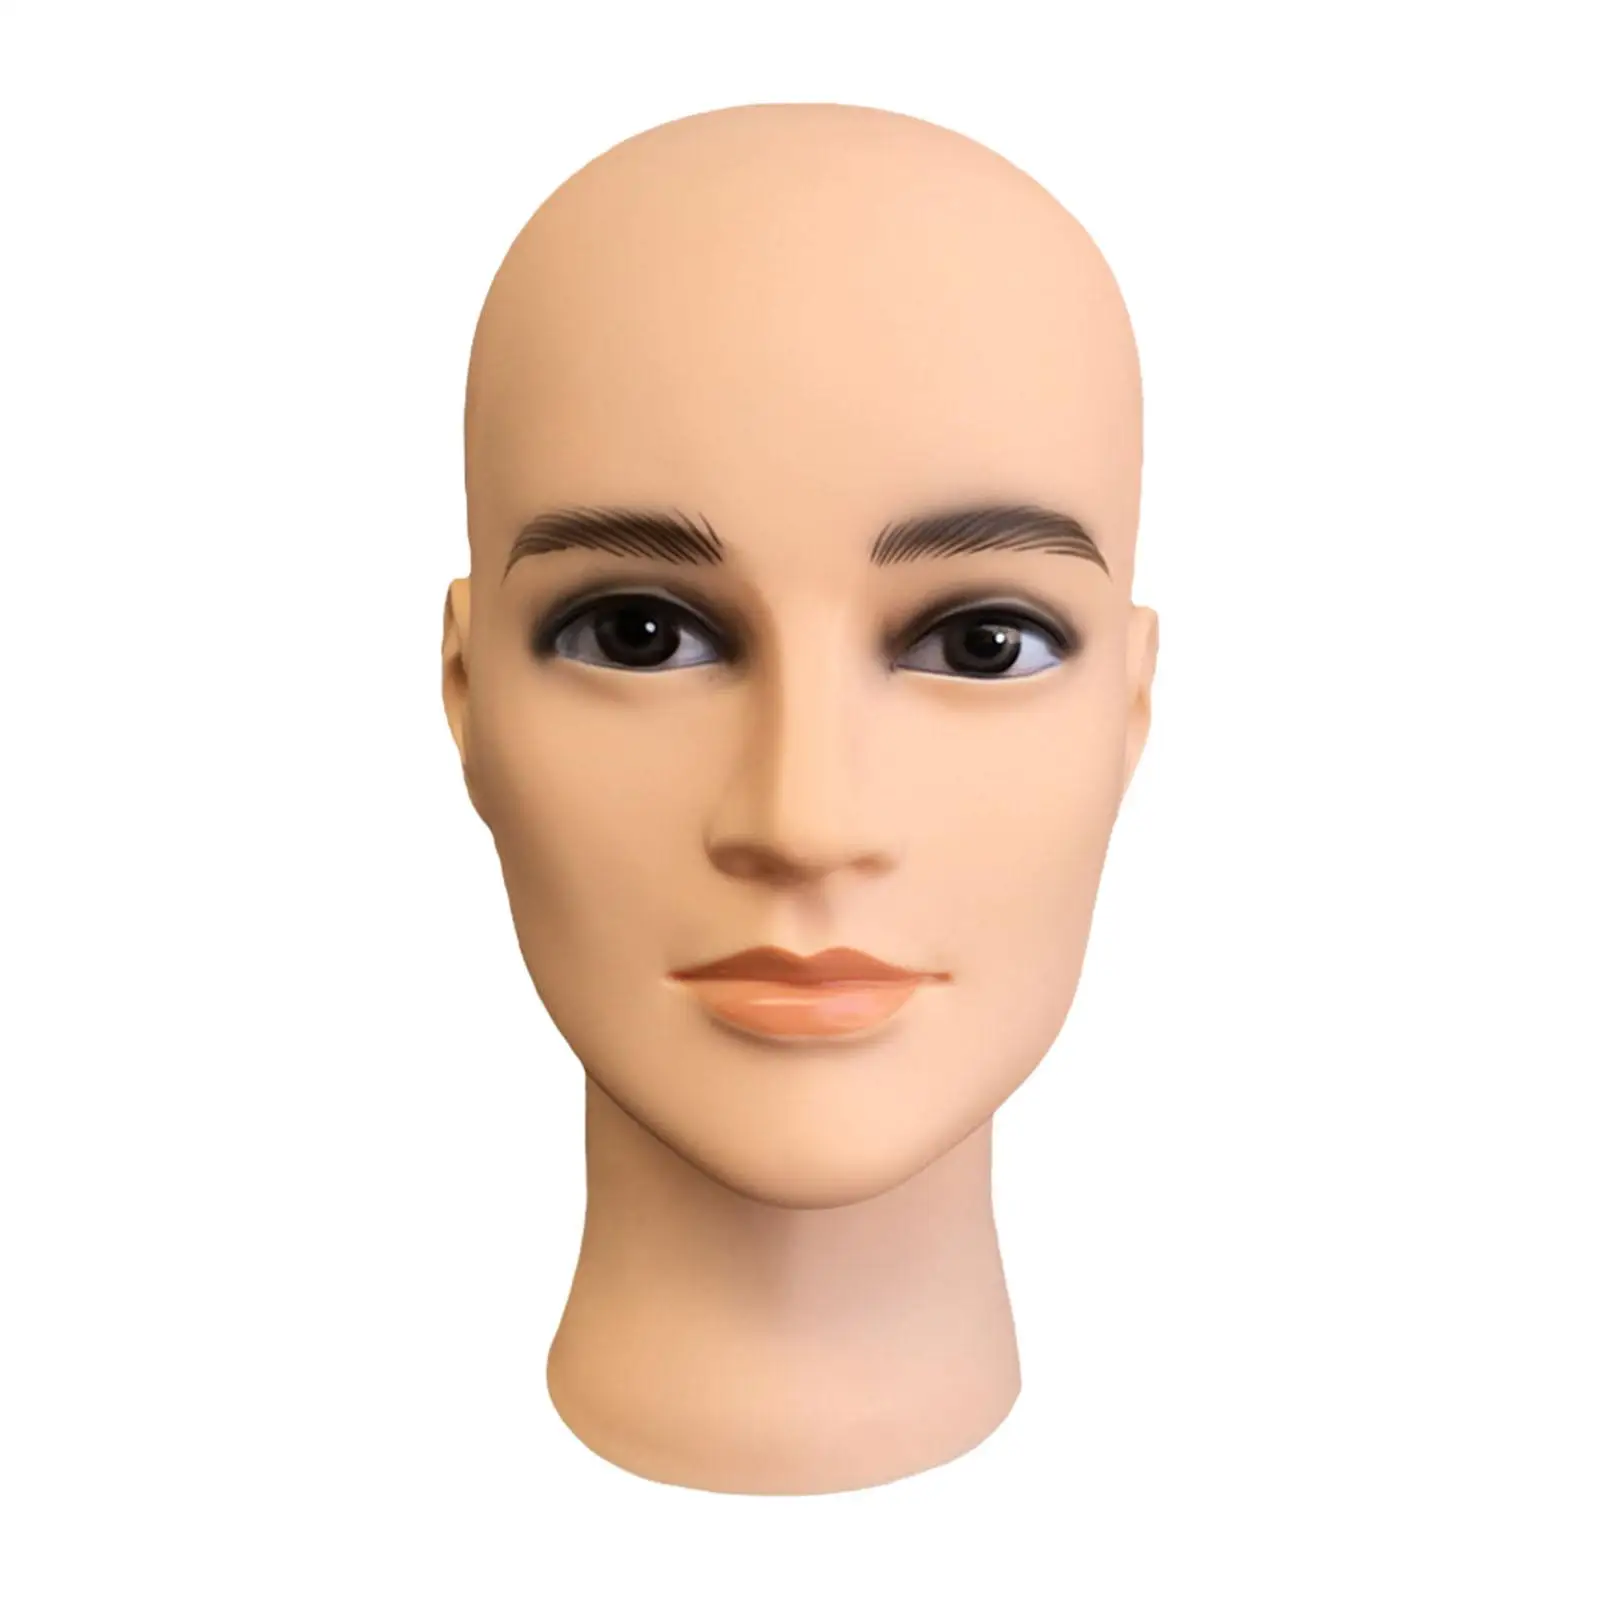 Wig Display Head Multifunctional Male Bald Mannequin Head Training Head for Hairpieces Caps Necklace Wigs Making Styling Jewelry